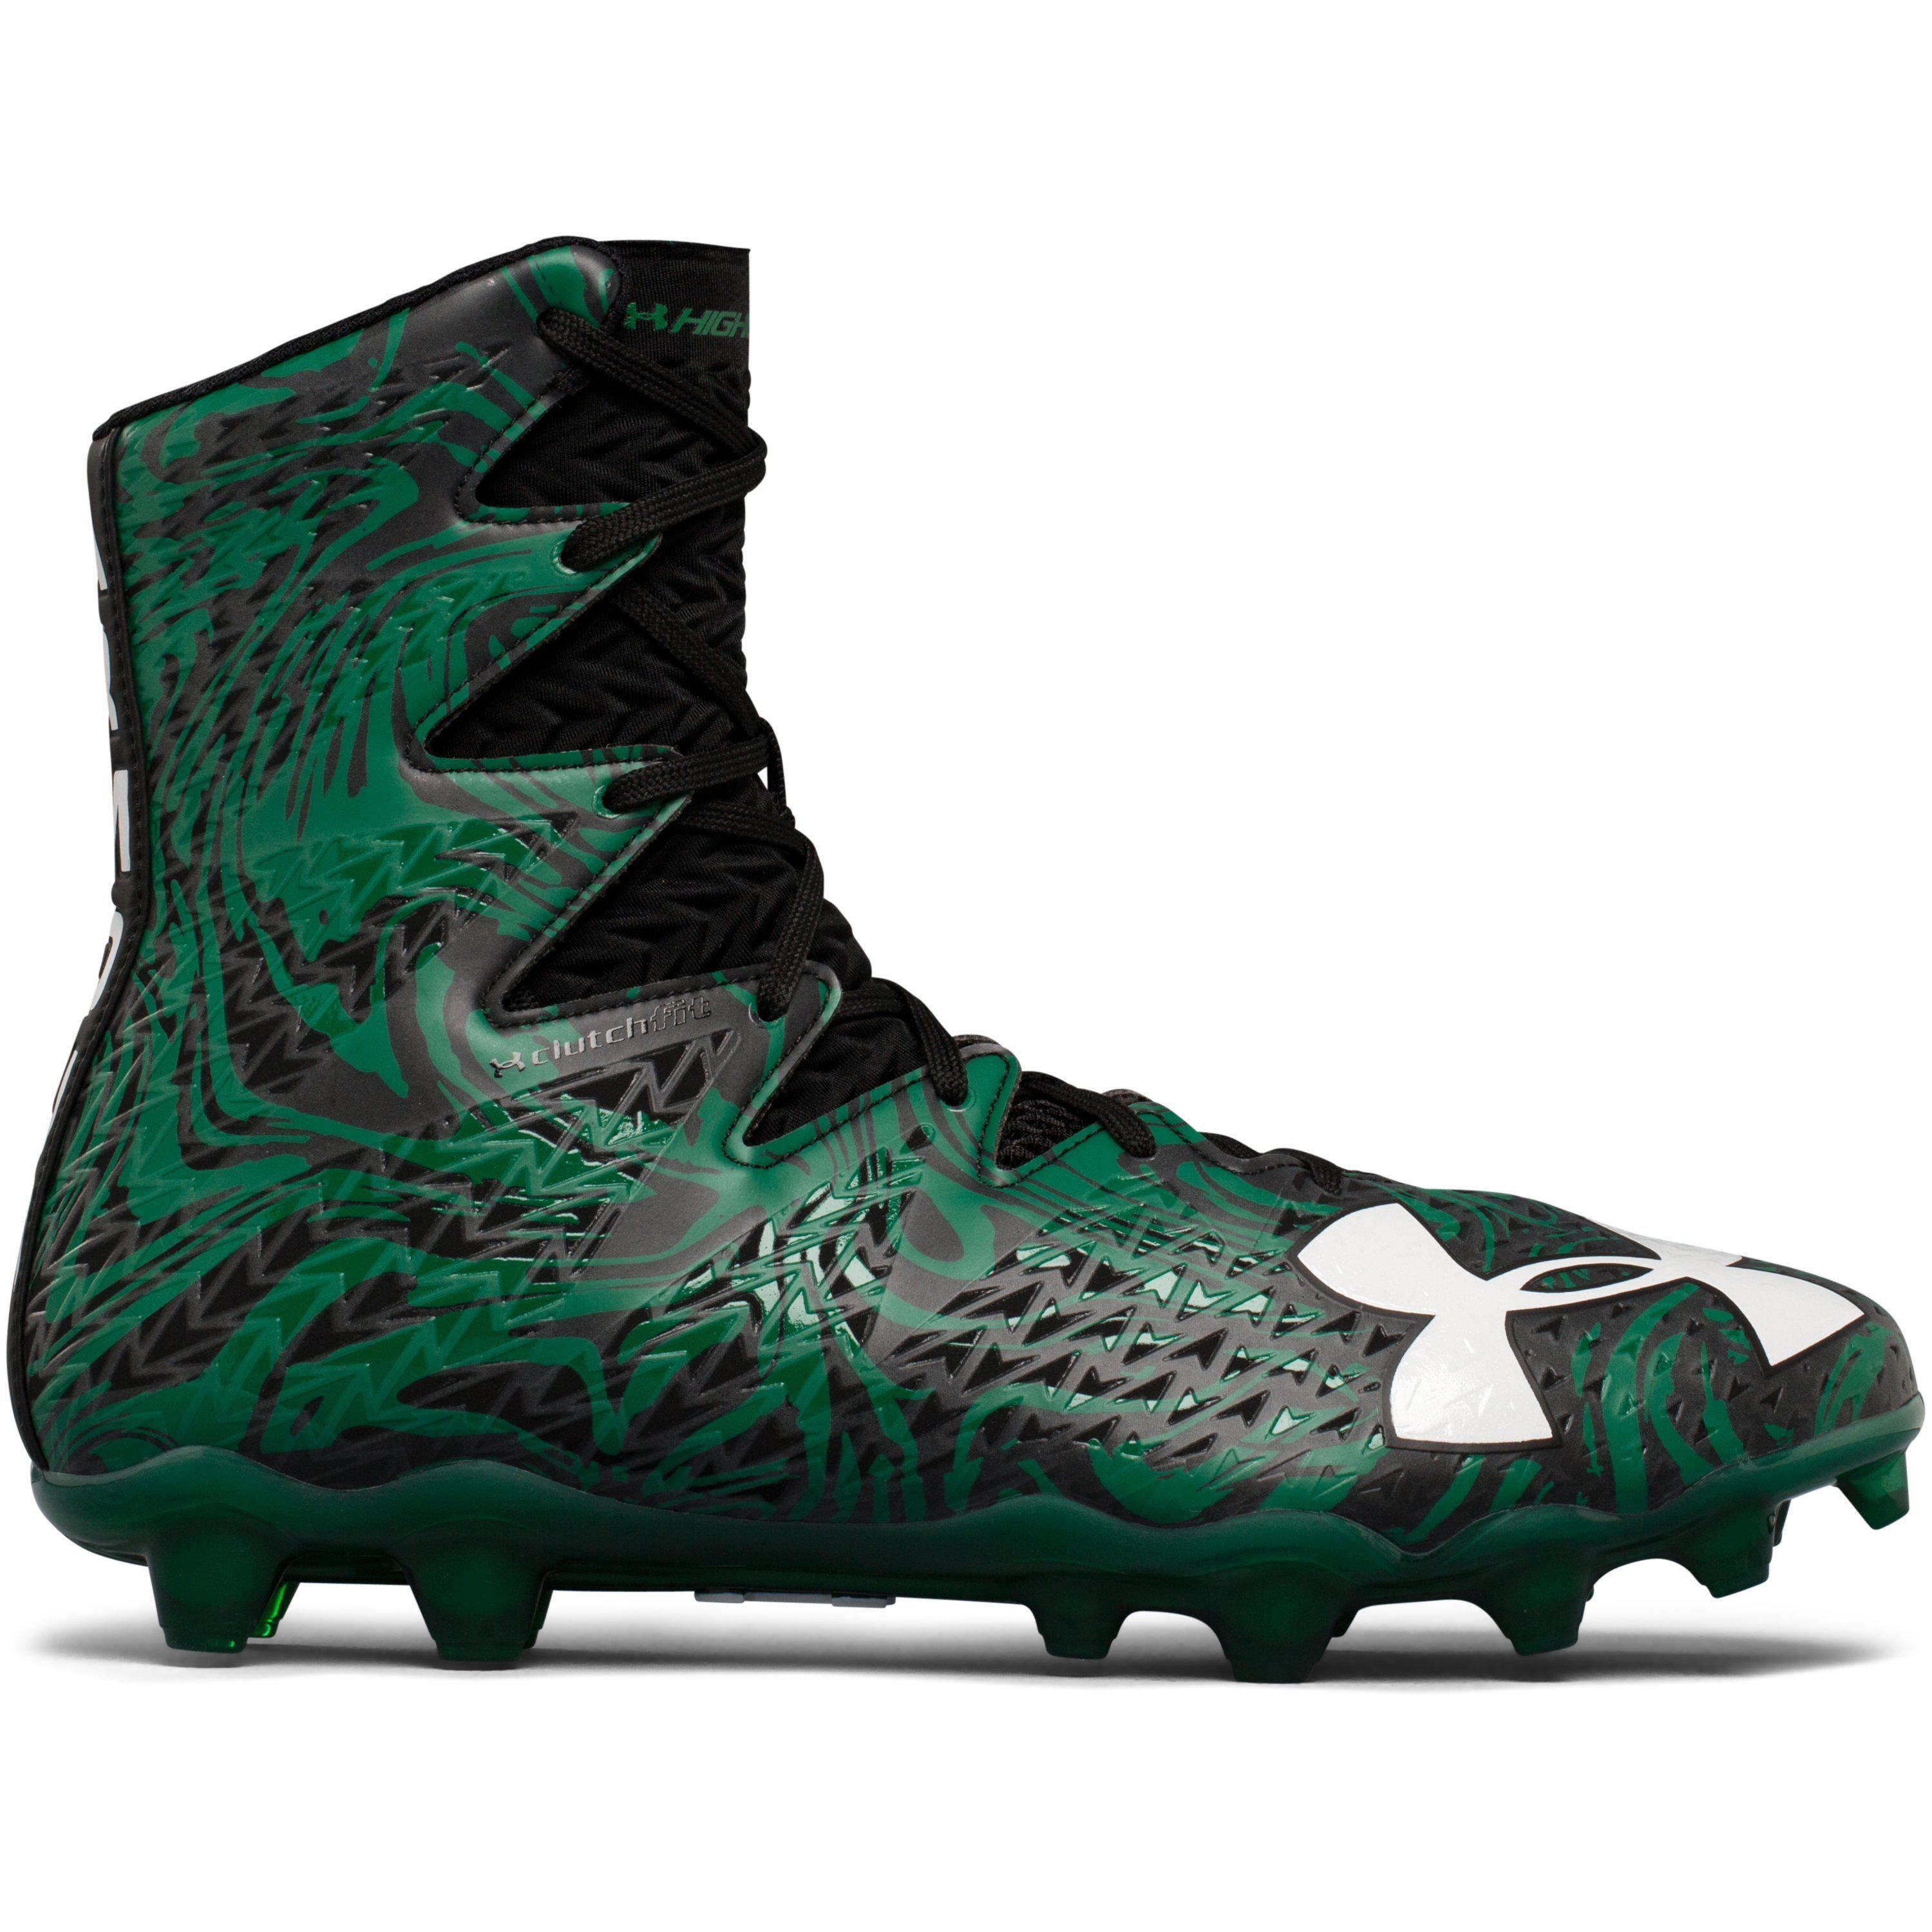 New Mens Under Armour Highlight LUX MC Lacrosse/Football Cleats Green/Black 10 M 